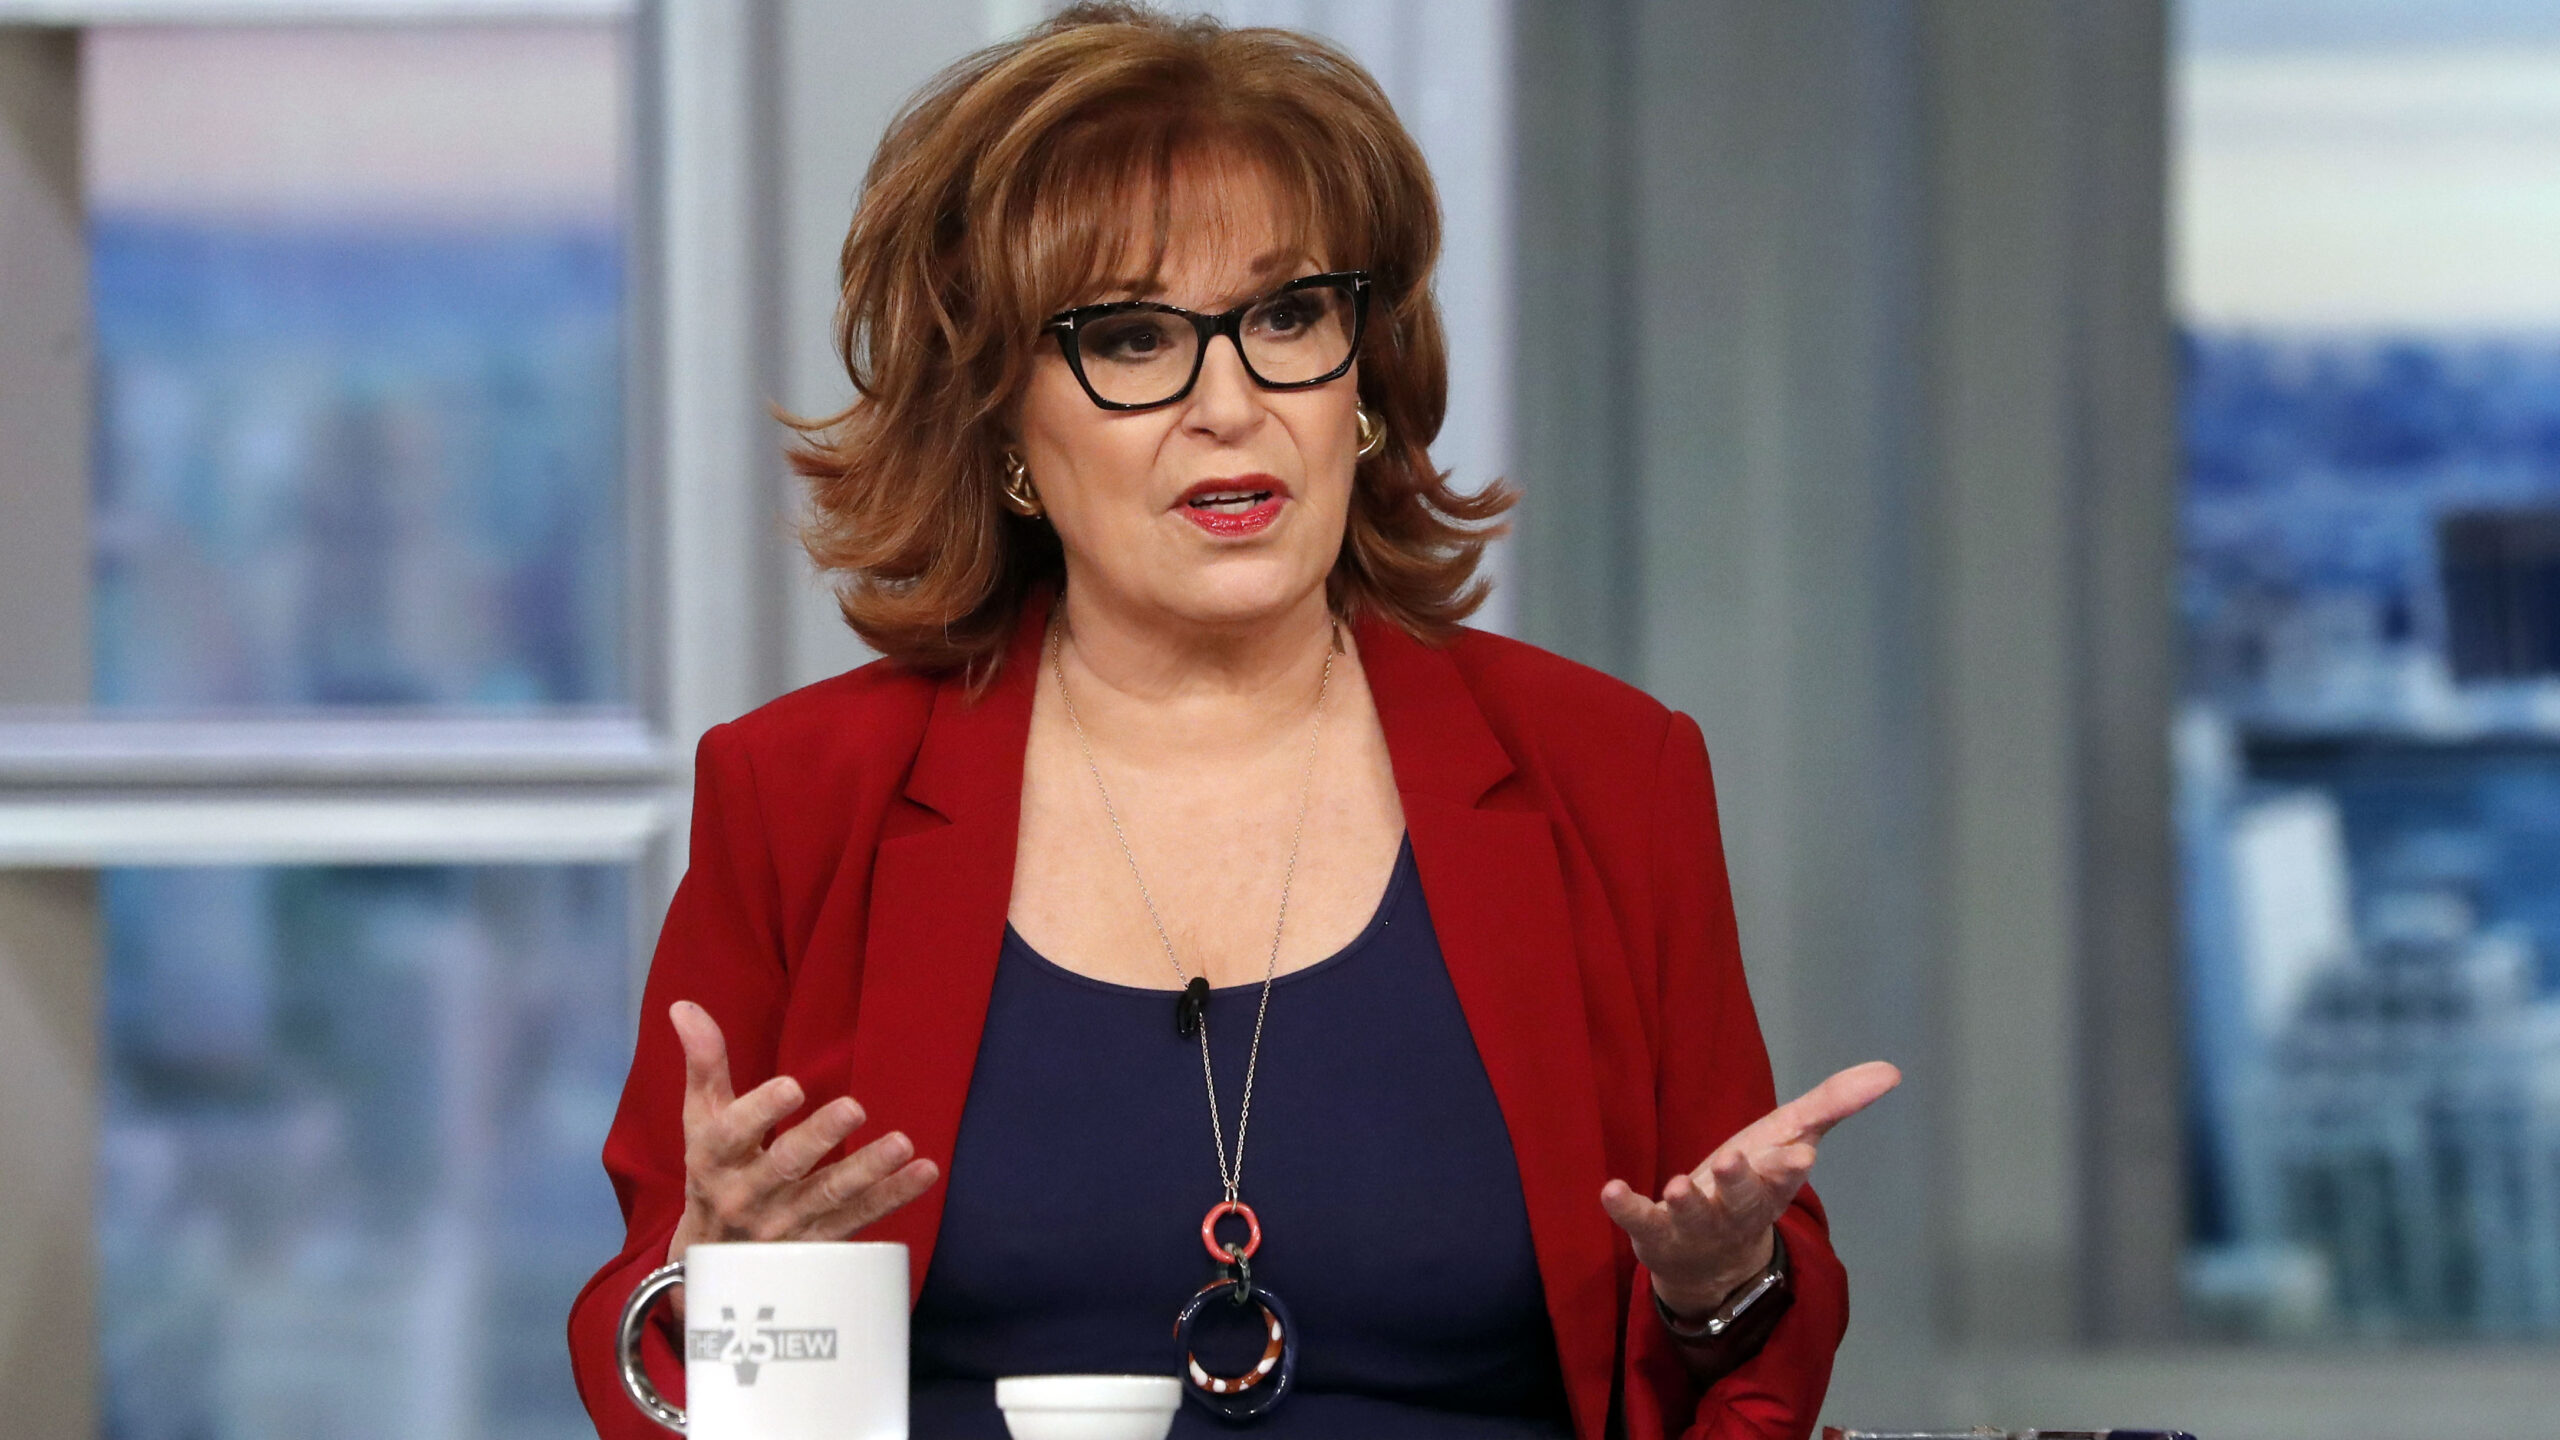 ‘The View’ Hosts Suggest GOP ‘Infighting’ Invited Hamas’ Terrorist Attacks On Israel